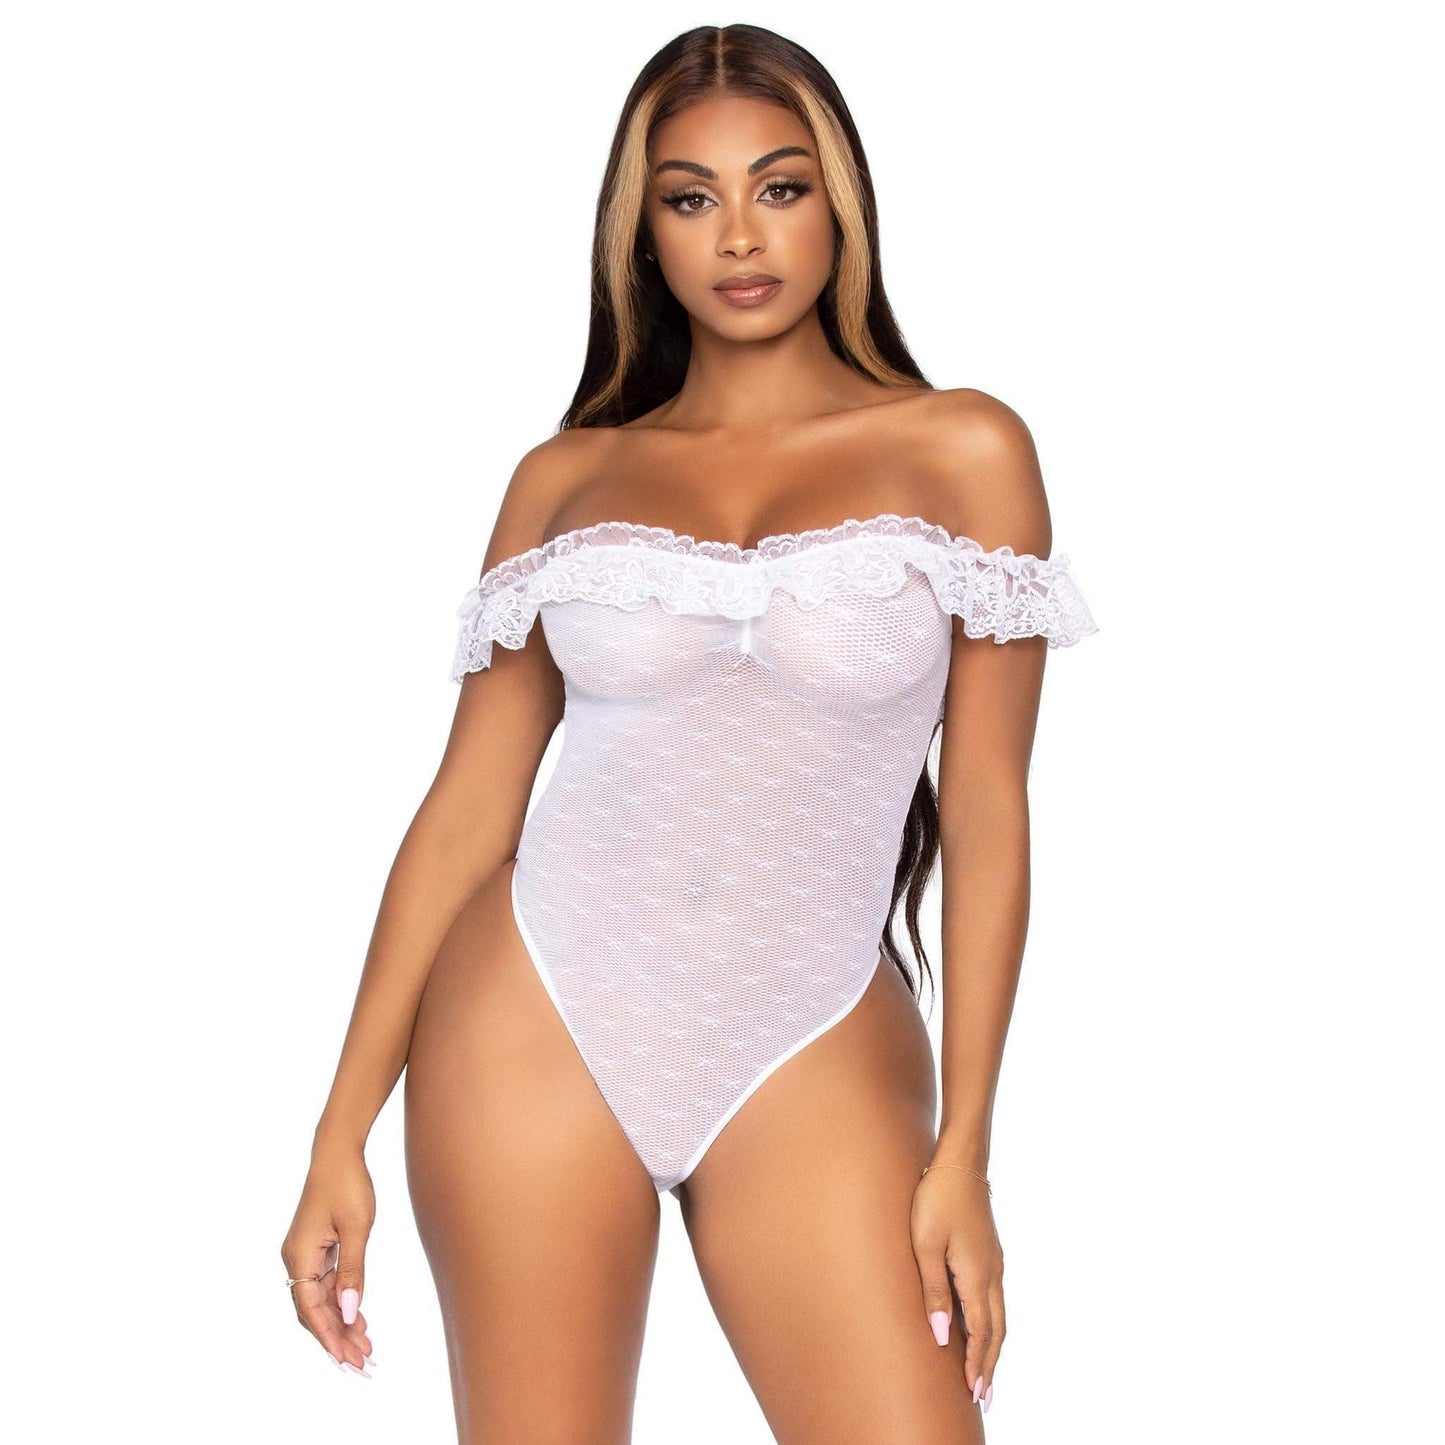 Lace Ruffle Snap Crotch Teddy - One Size - White